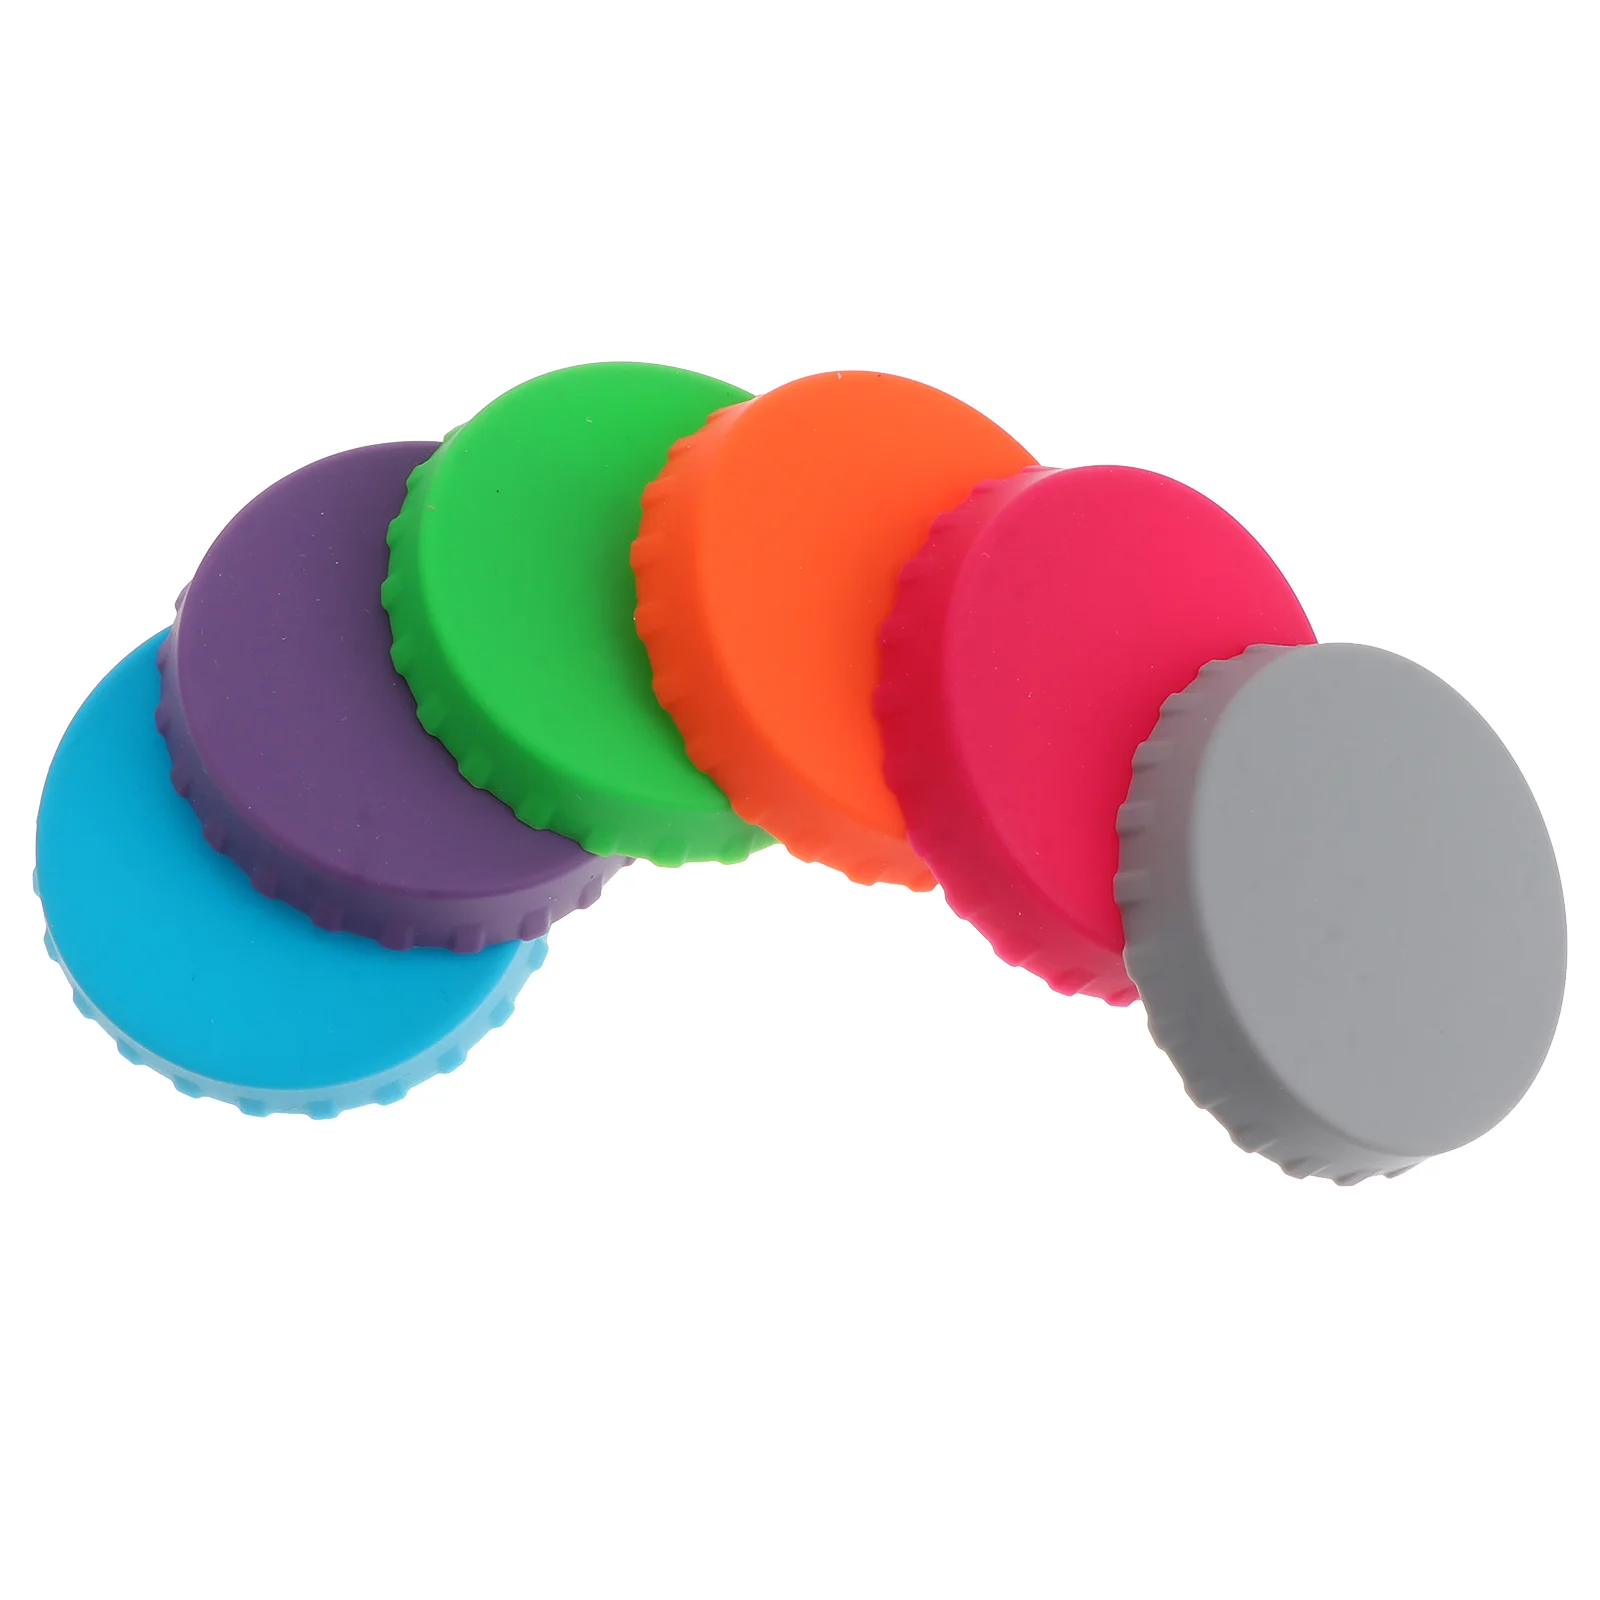 

6PCS Silicone Soda Can Lids, Assorted Silicone Beverage Can Lid Cover Protector Fits Standard Soda or Beverage Cans ( )